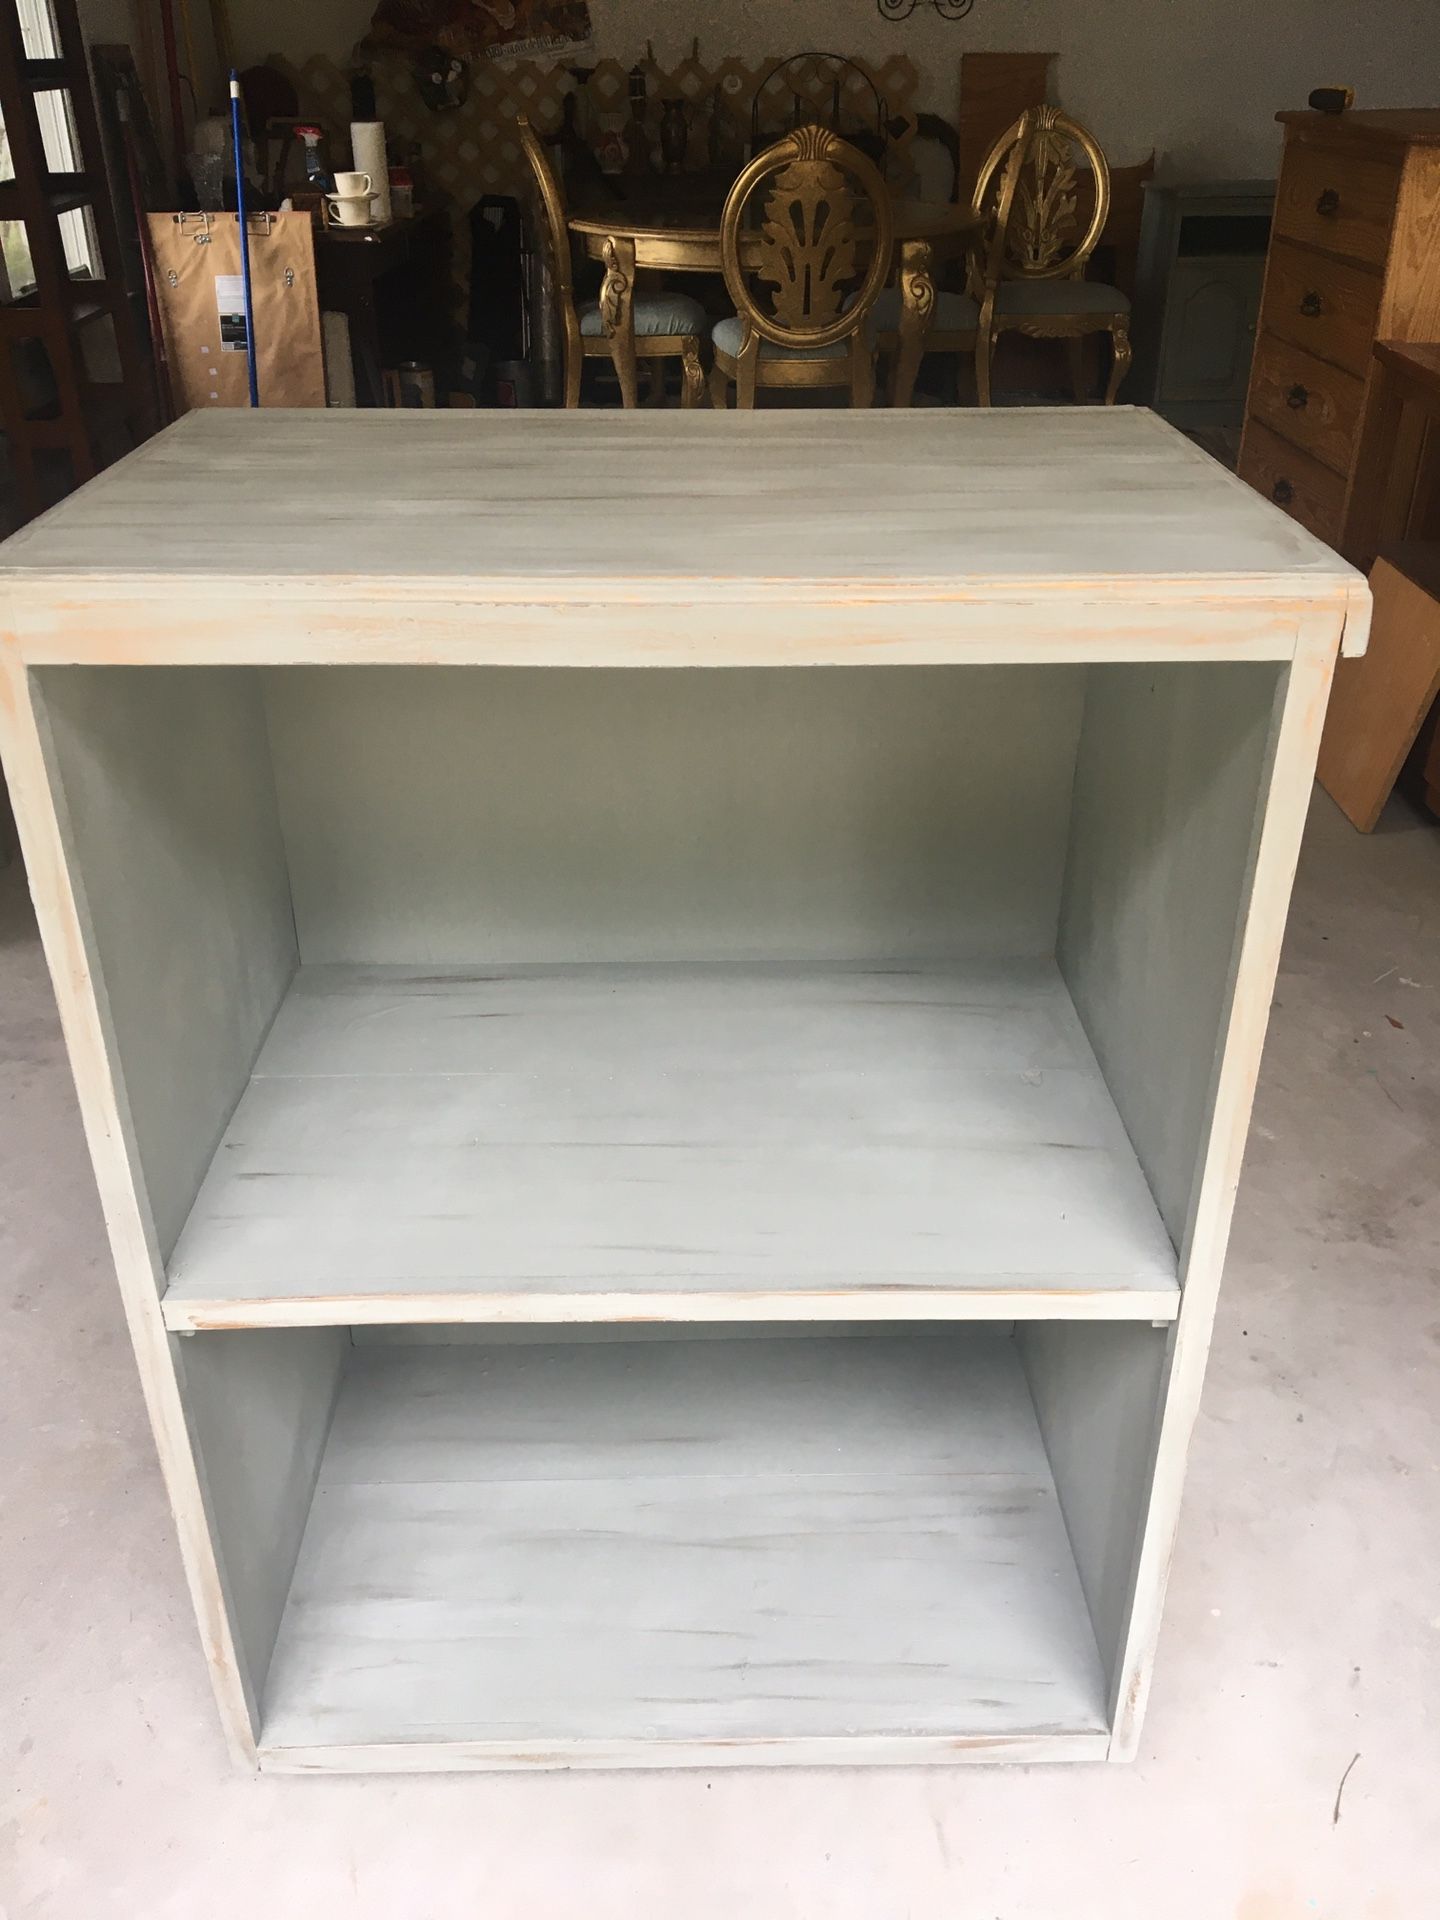 2 Shelf Solid Wood Bookcase With Bead Board On The Sides. Custom Color Paint SeaSalt Gray.